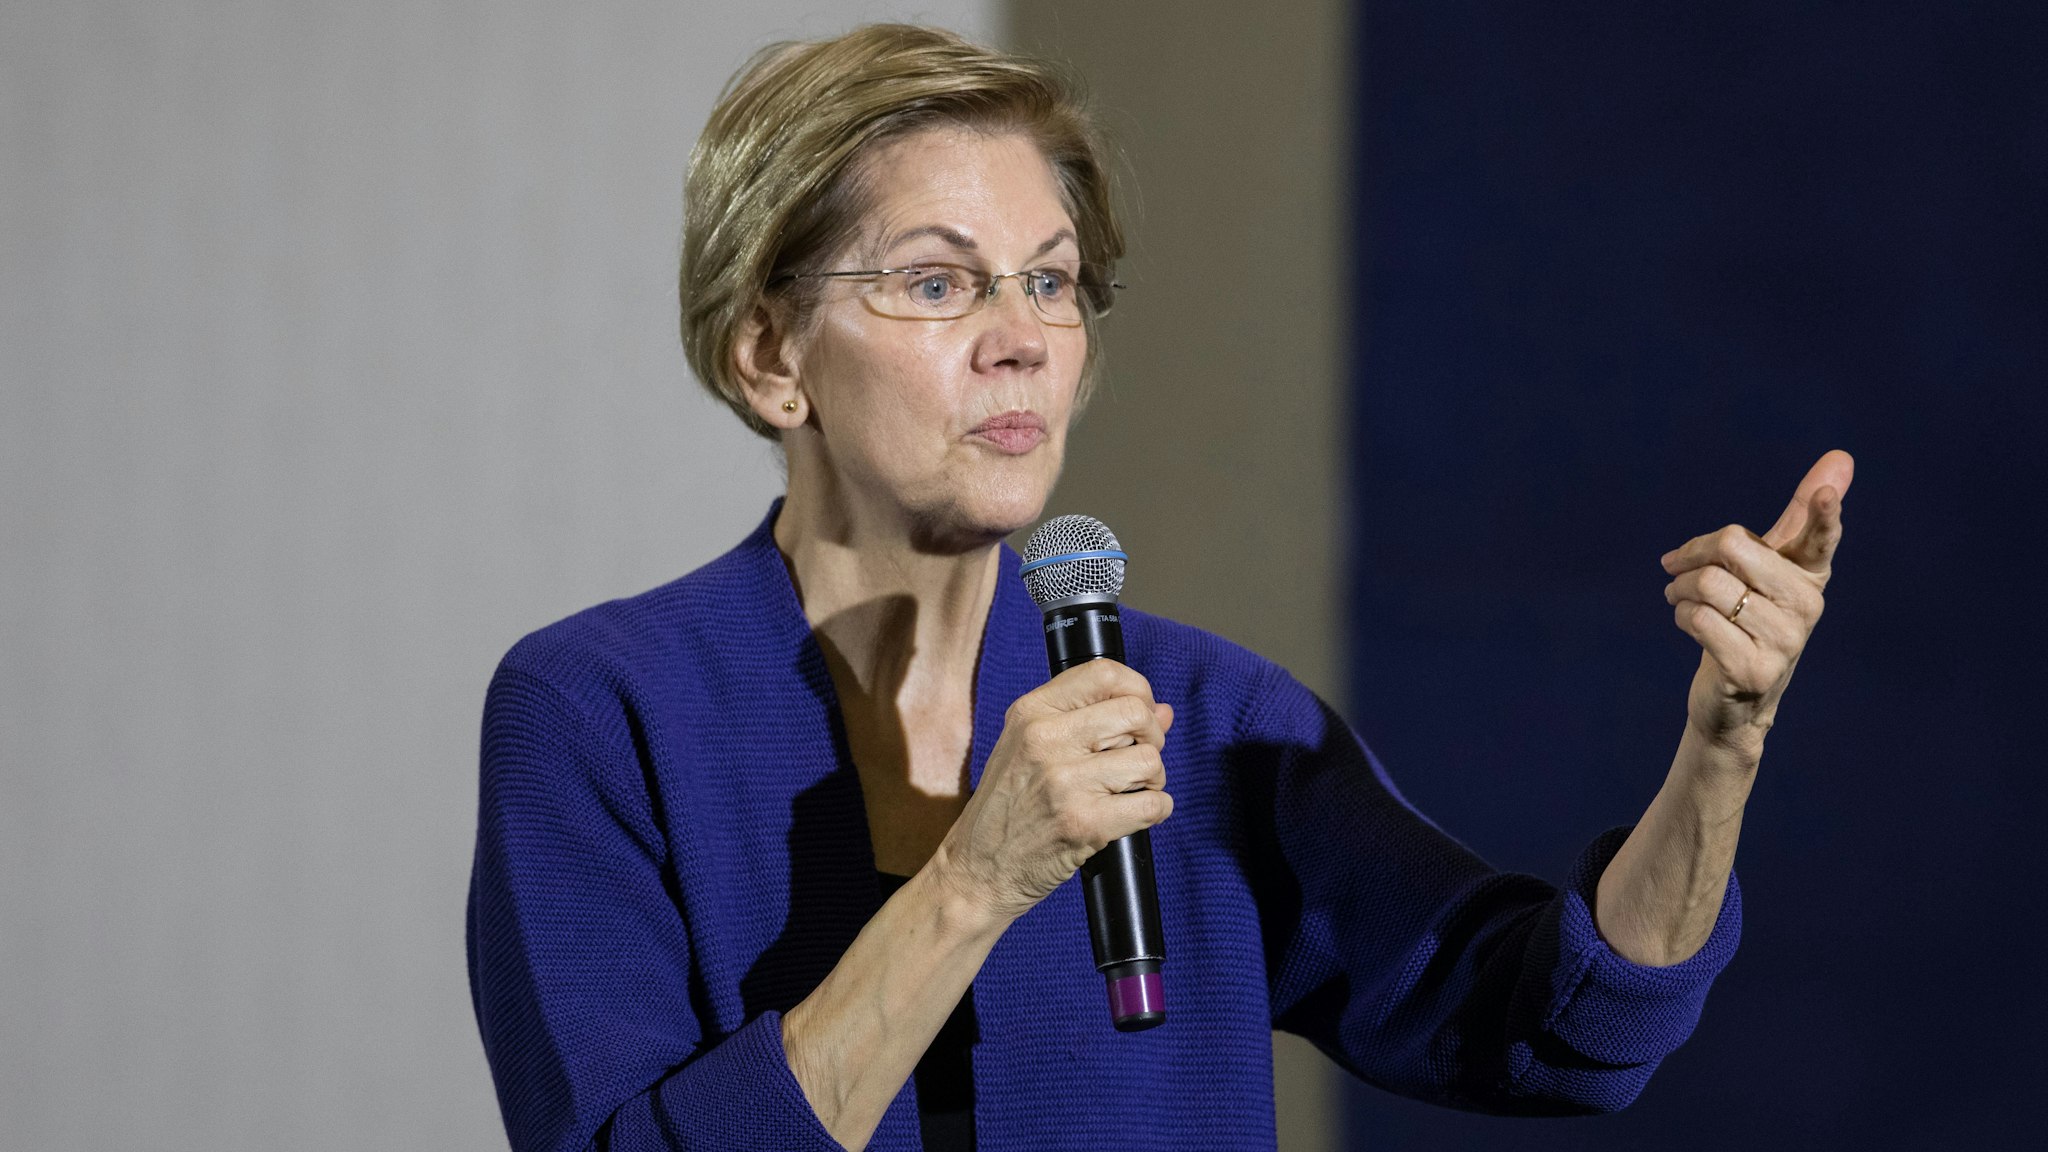 CONCORD, NH - JANUARY 02: Democratic presidential candidate Sen. Elizabeth Warren (D-MA) speaks on stage during her first campaign event of 2020 on January 2, 2020 in Concord, New Hampshire. The Iowa caucuses, the first nominating contest in the Democratic presidential primary season, will take place on February 3.